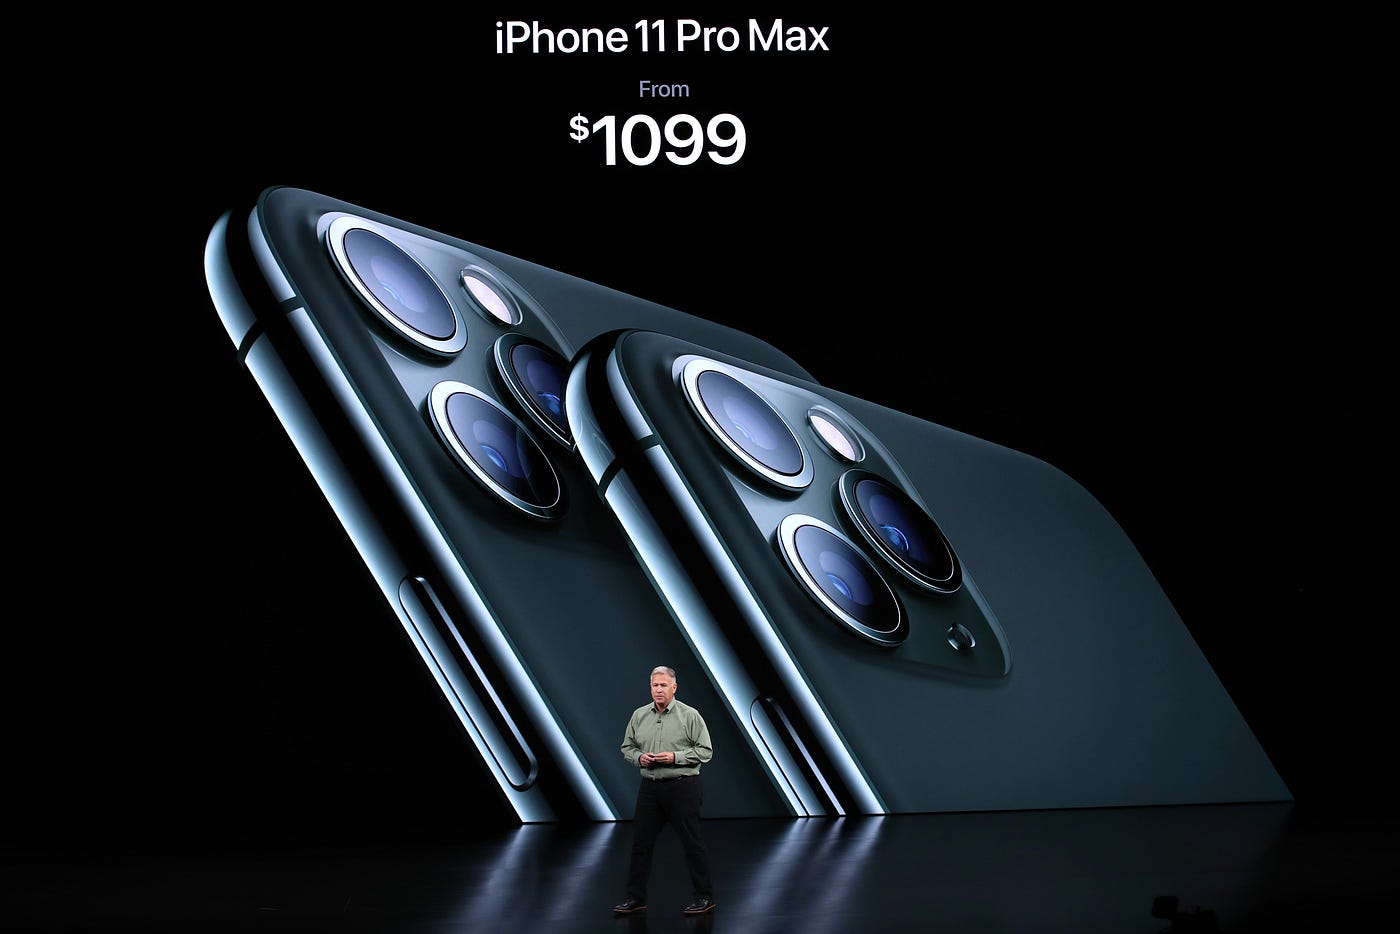 Apple again upsells users to the iPhone 15 Pro Max